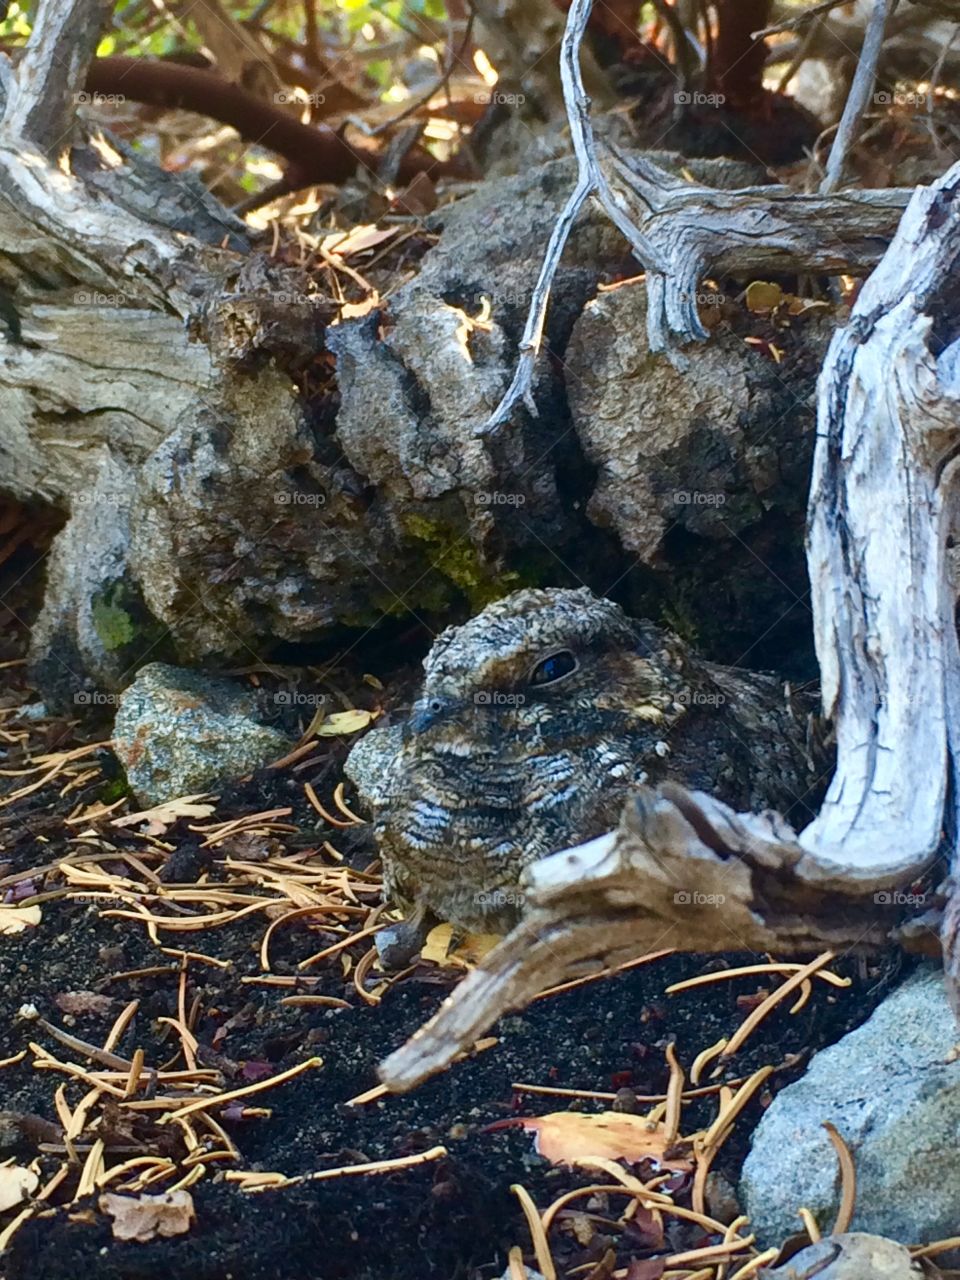 Camo Bird. Watch where you step !!  Almost stepped on this little guy he was so well hidden in the dirt .lighthouse trail Tahoe 